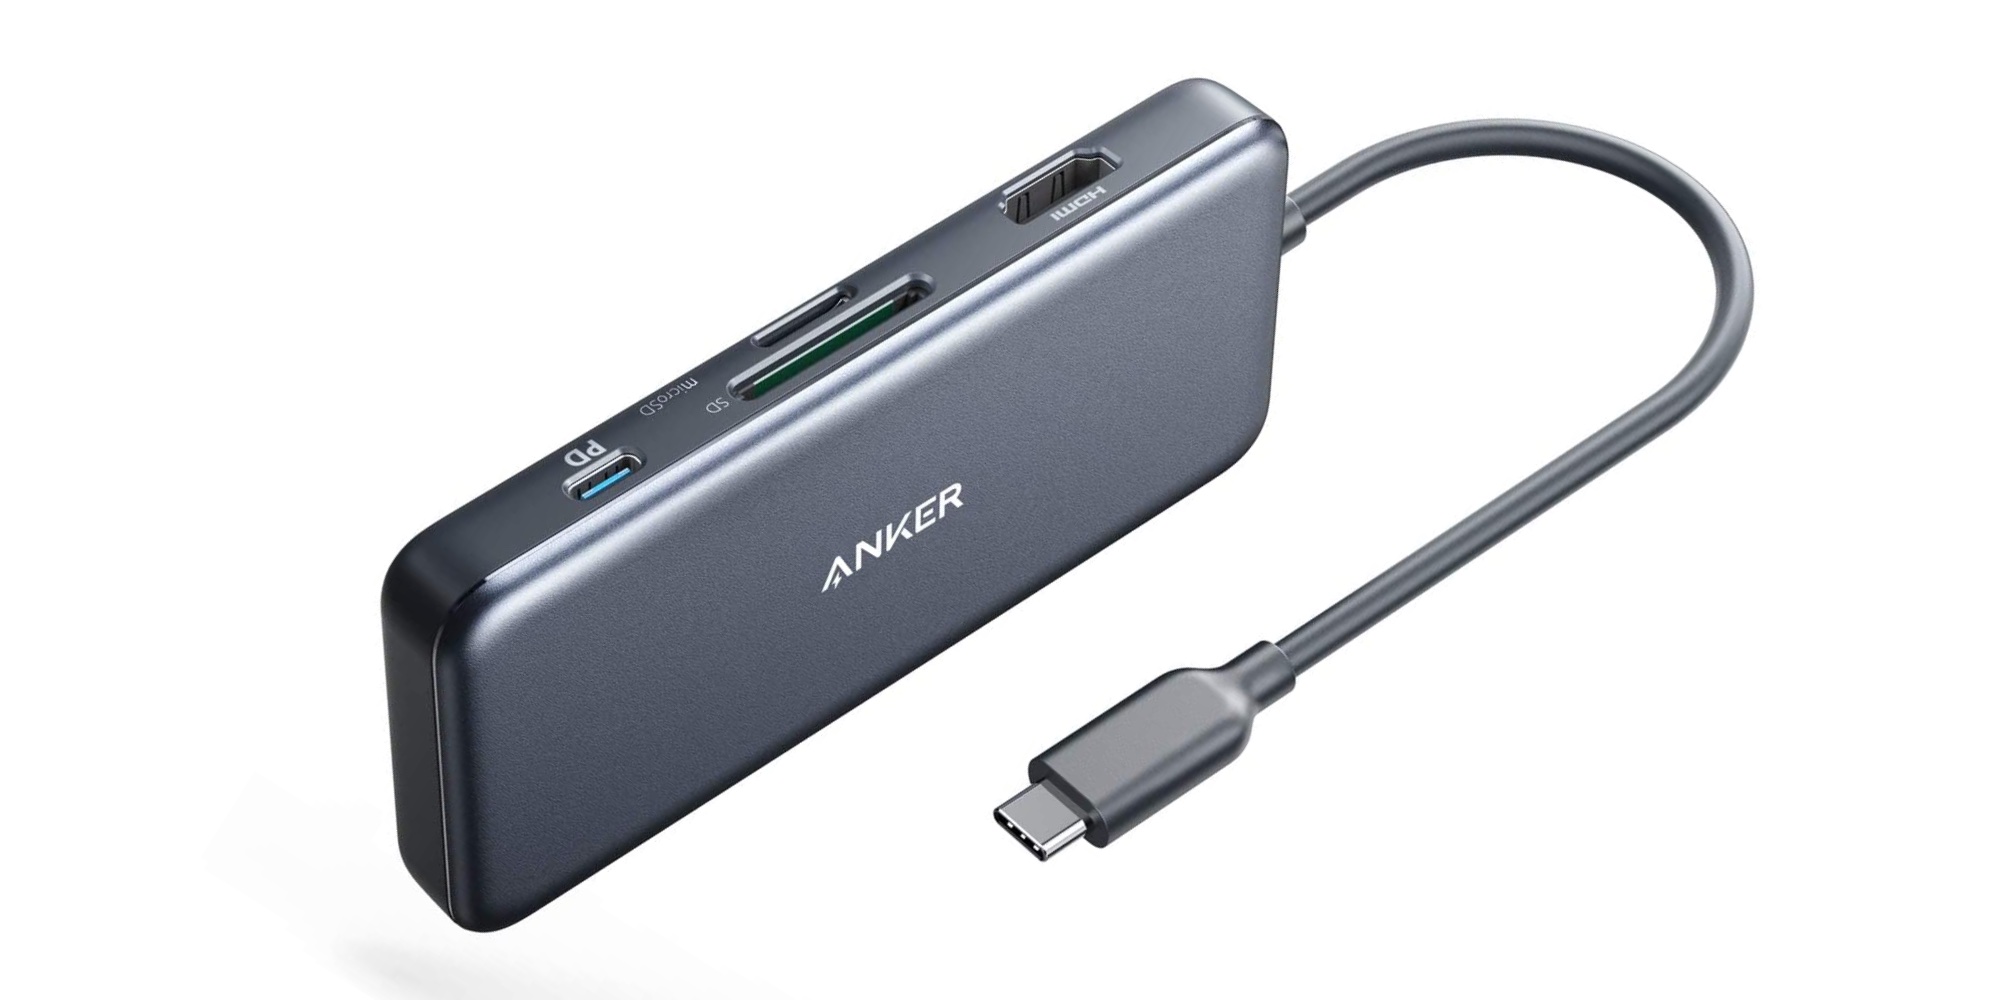 Anker usb hub 5-in-1 USB C Adapter 4K usb c hub to HDMI SD and